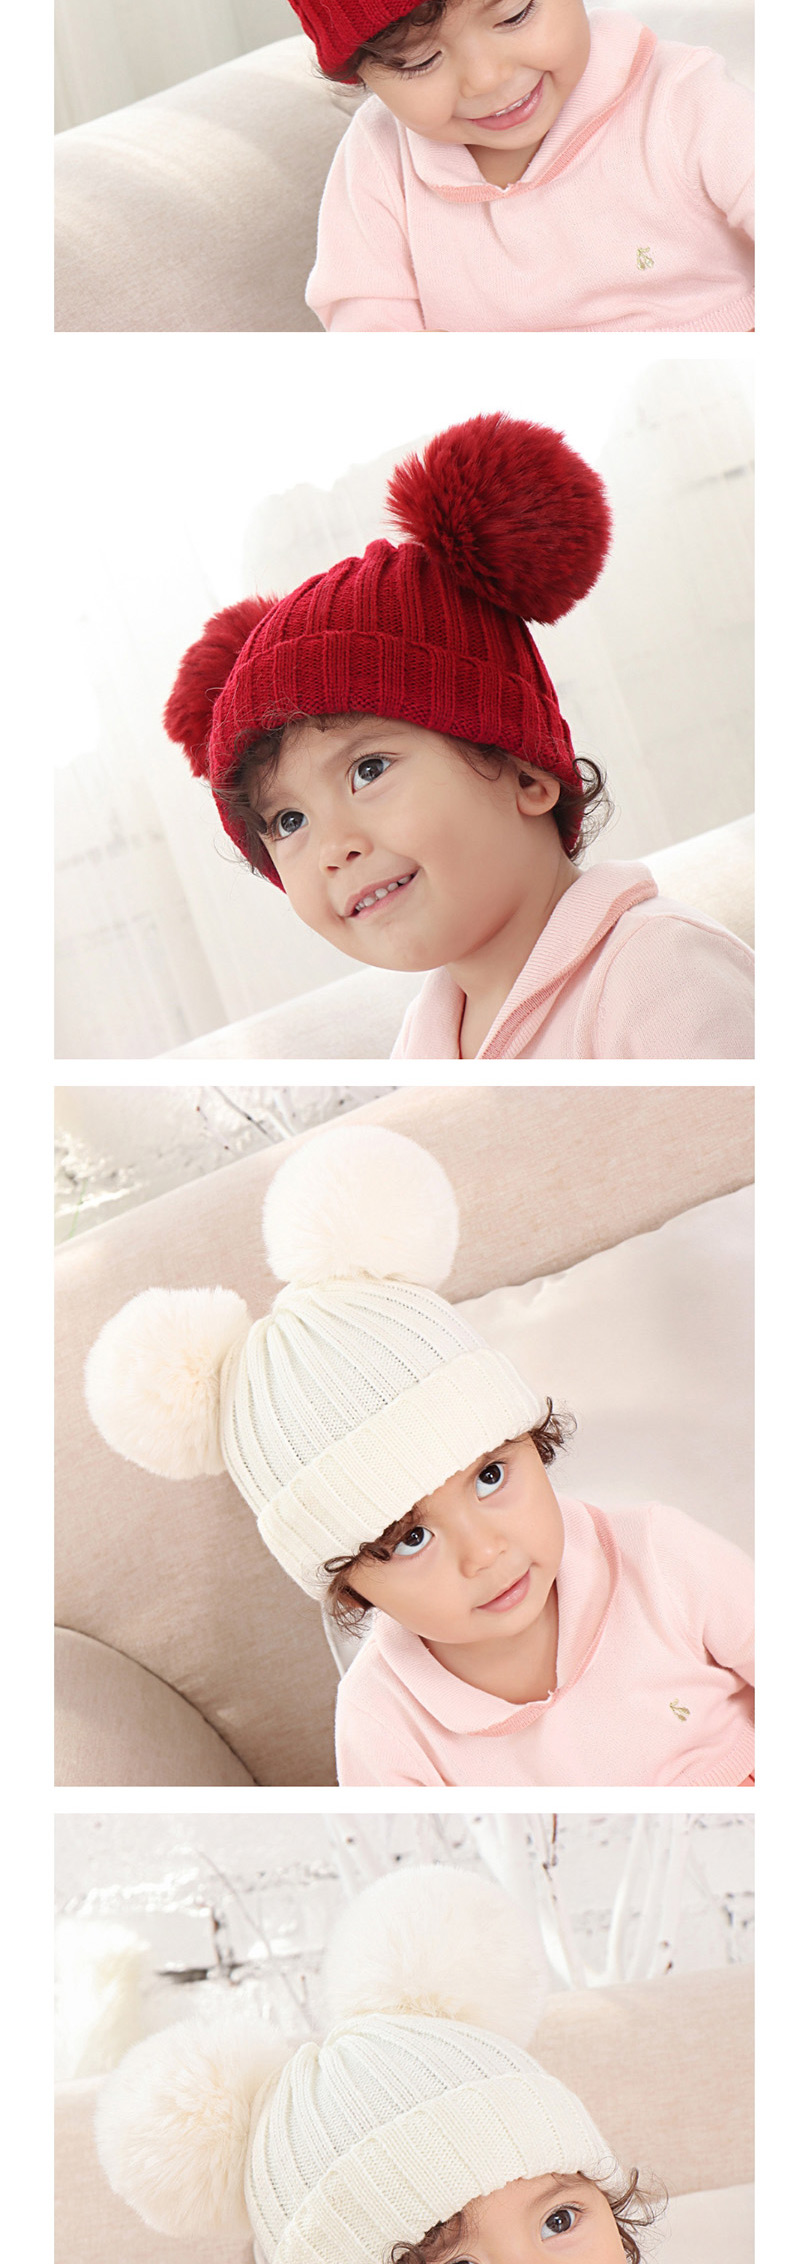 Fashion Leather Powder Threaded Double-hair Ball Knitted Baby Hat,Children